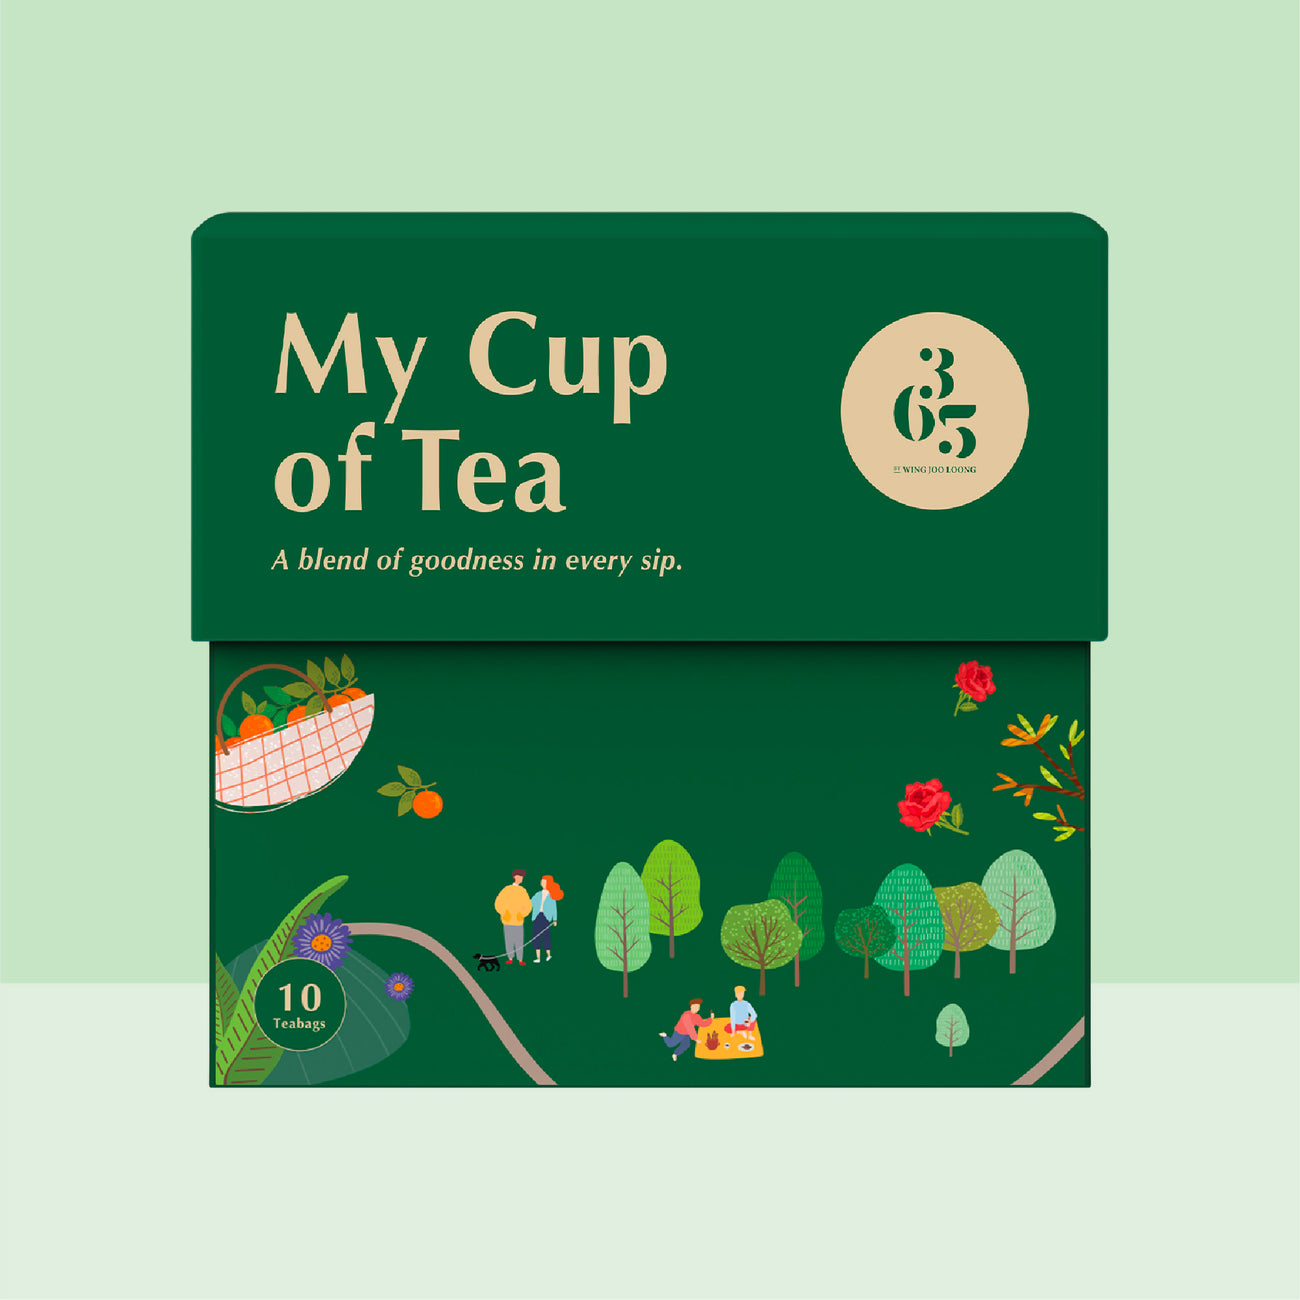 My Cup of Tea (Assorted Teabags)